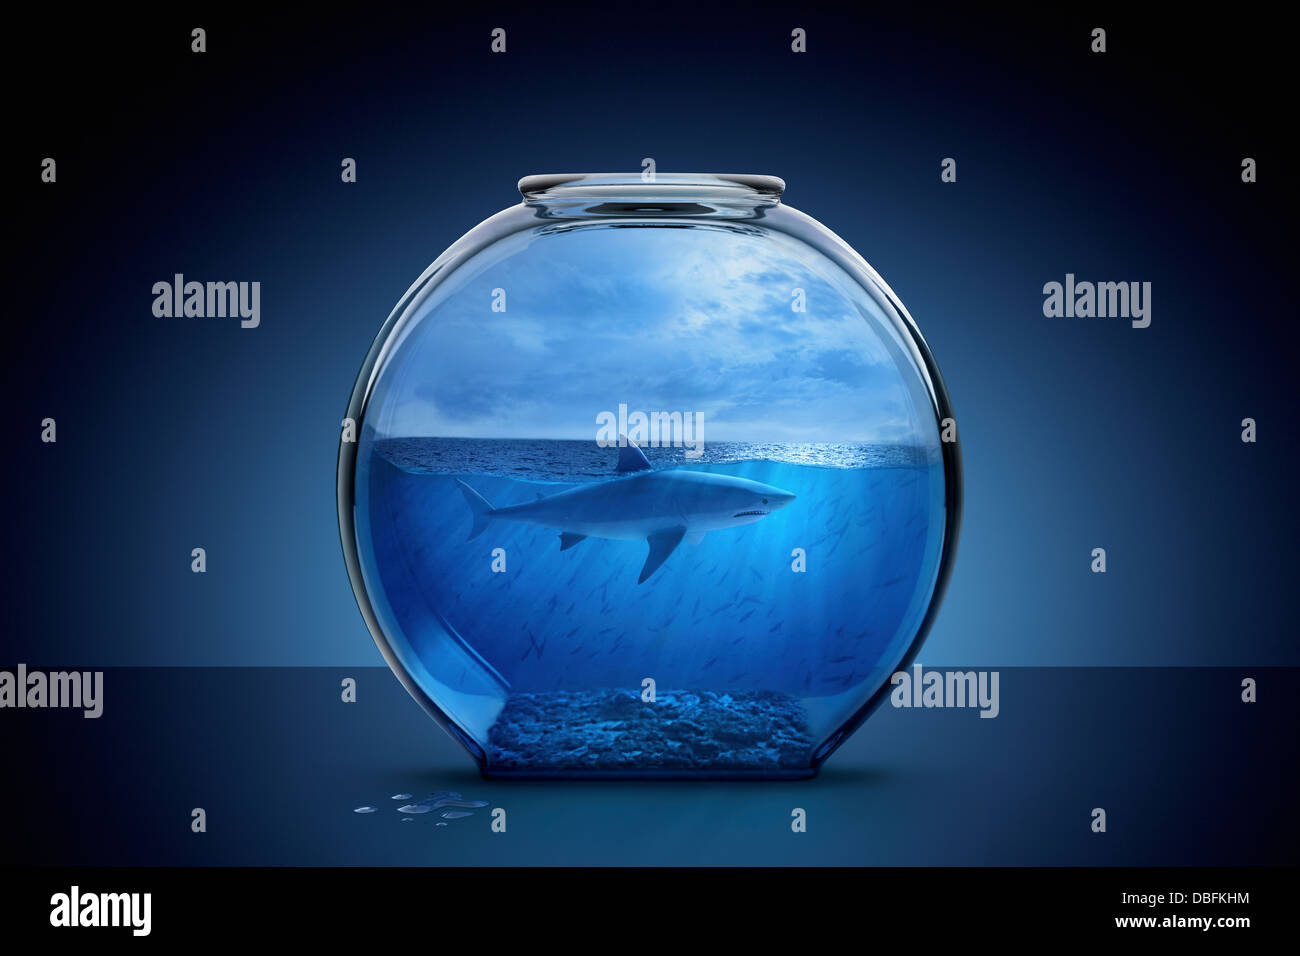 Shark swimming in fishbowl Banque D'Images